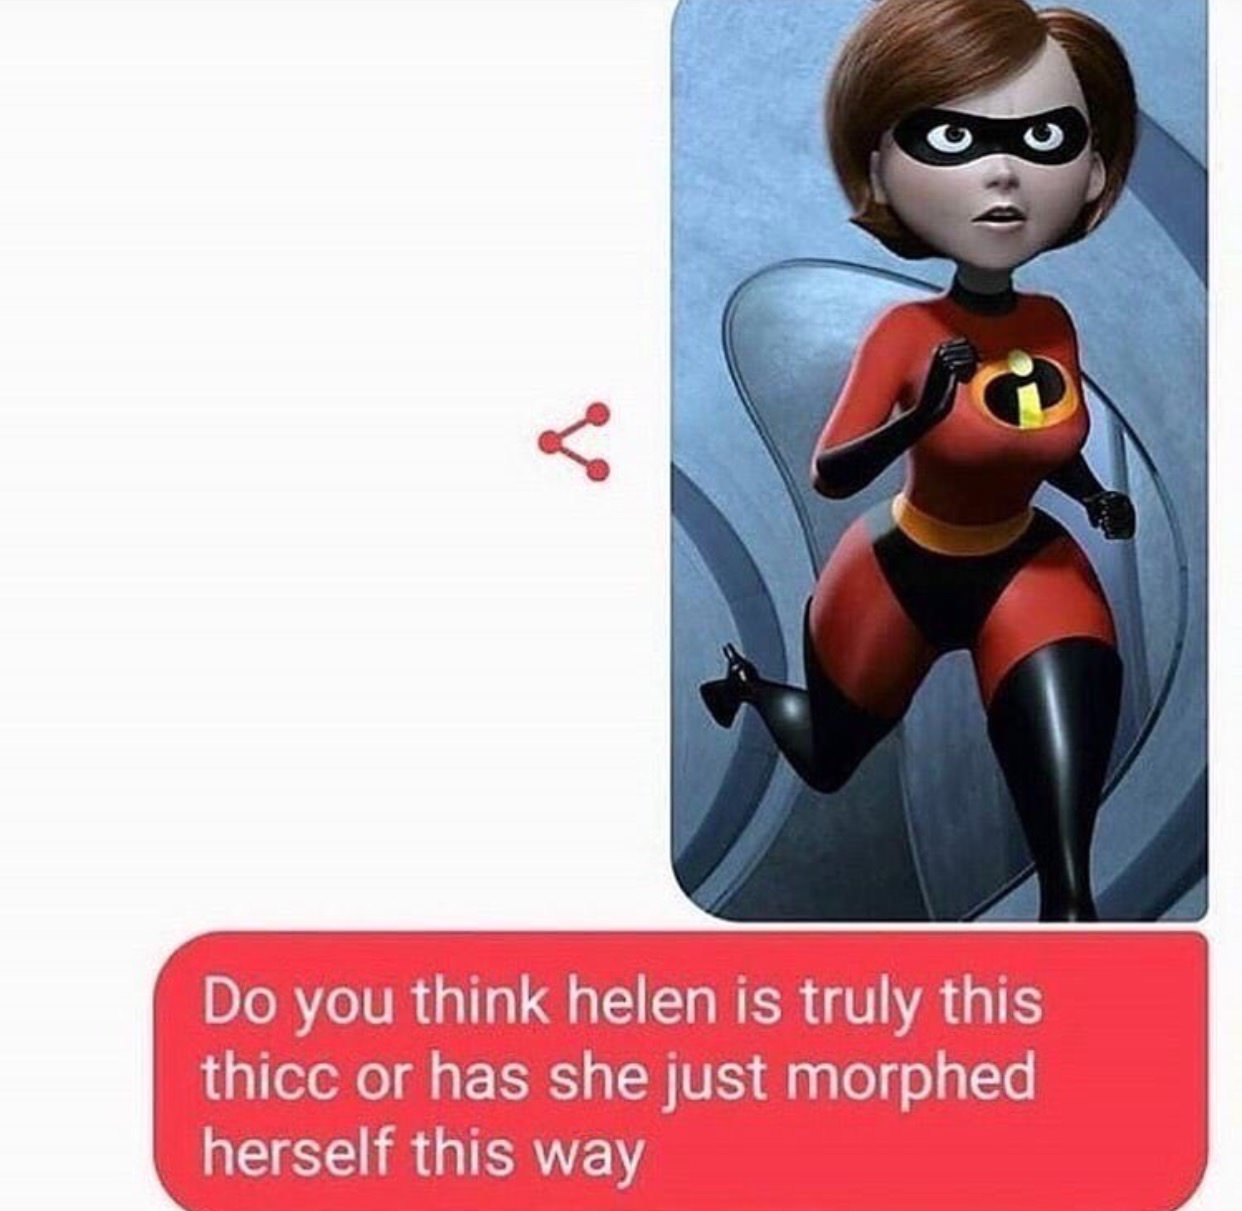 thicc helen - Do you think helen is truly this thicc or has she just morphed herself this way